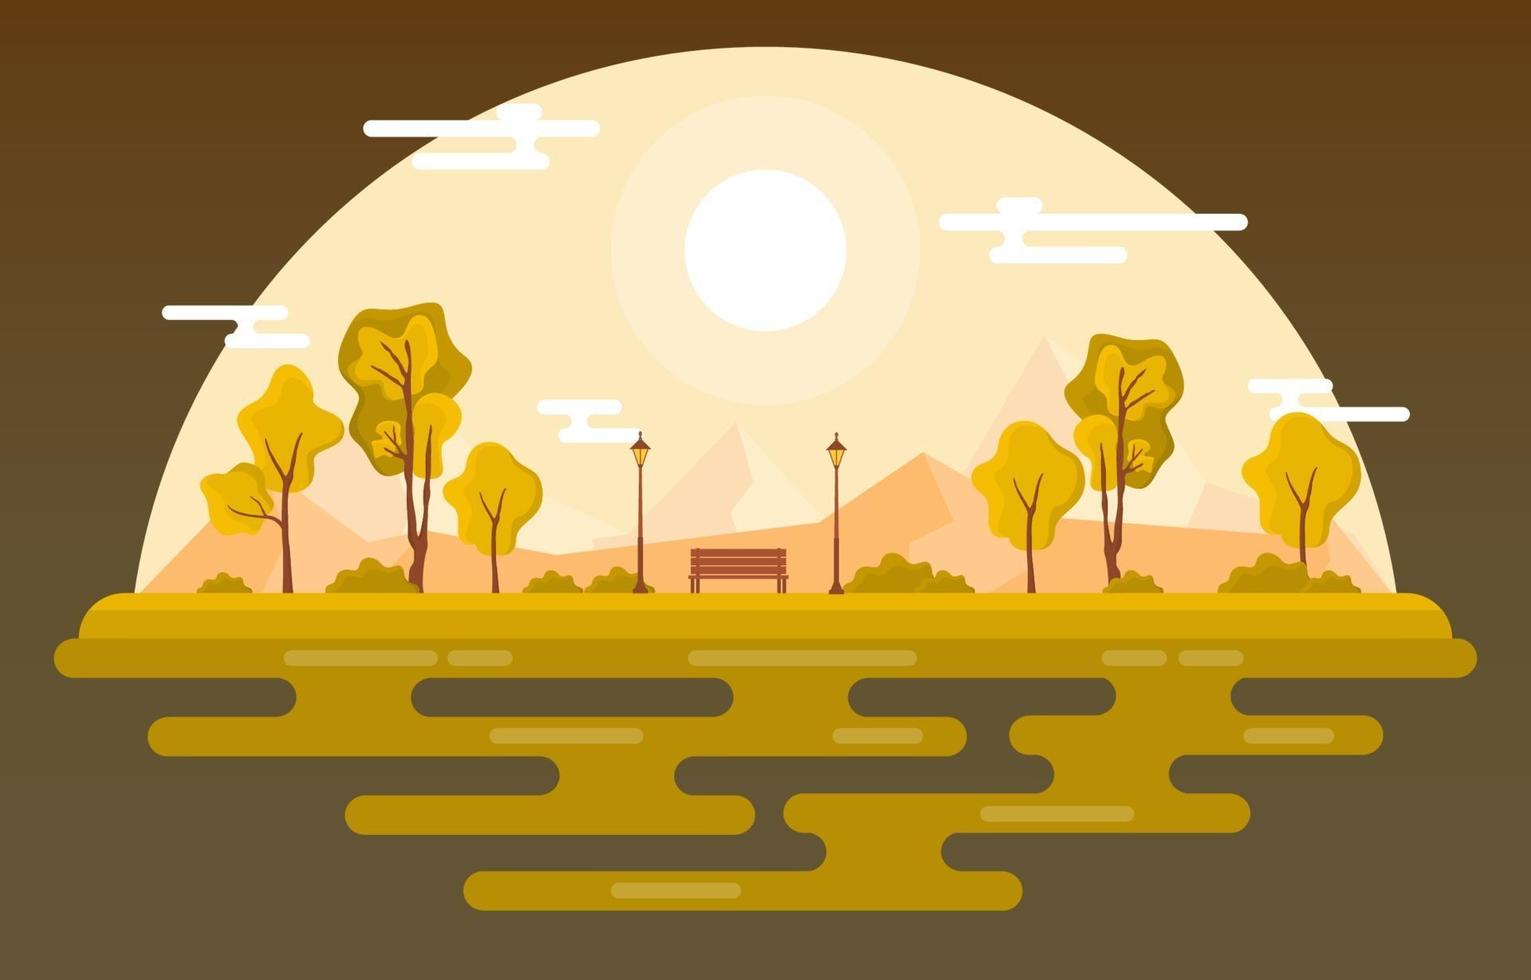 Autumn Park Scene with Trees and Bench vector